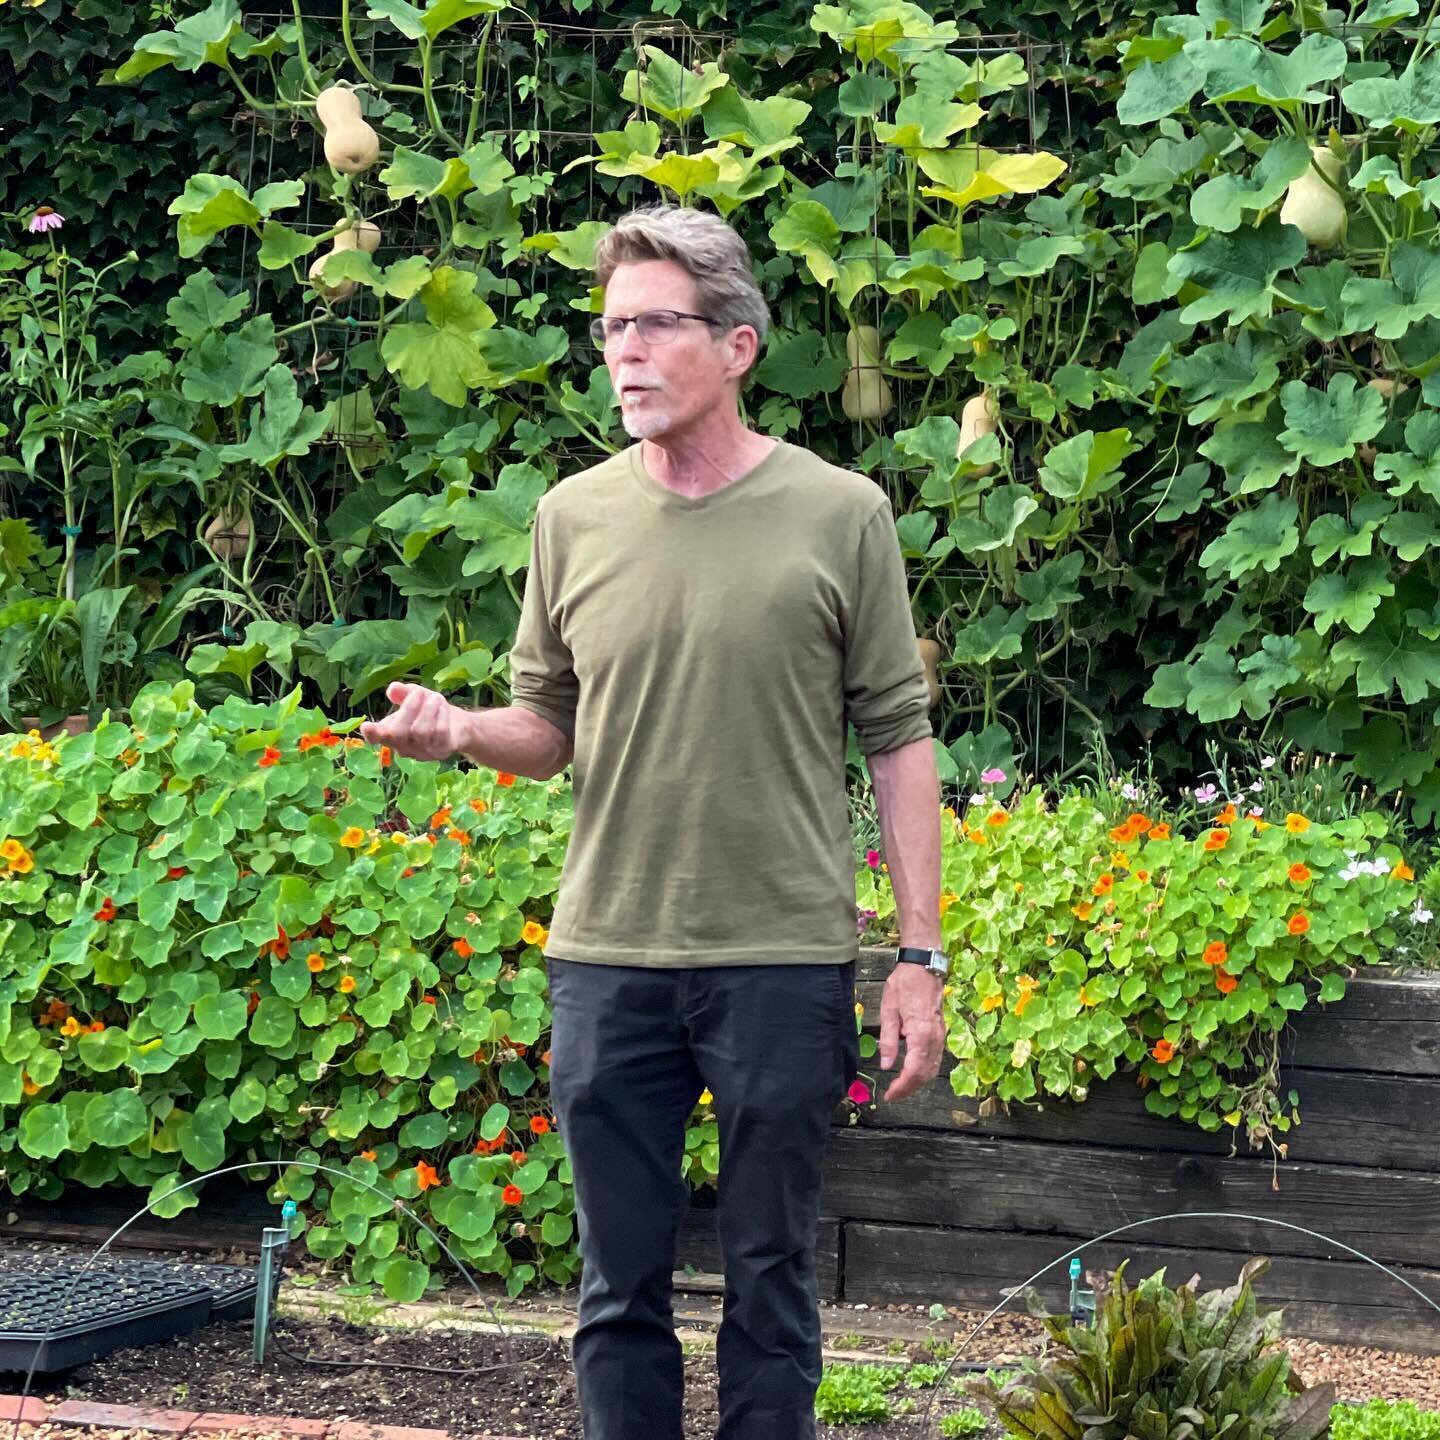 Last summer Wally and I had the pleasure of visiting the garden of chef and philanthropist @rick_bayless. Bayless opened Frontera Grill in 1987 forever changing the face of Mexican food in Chicago. The production garden supplies his three downtown re